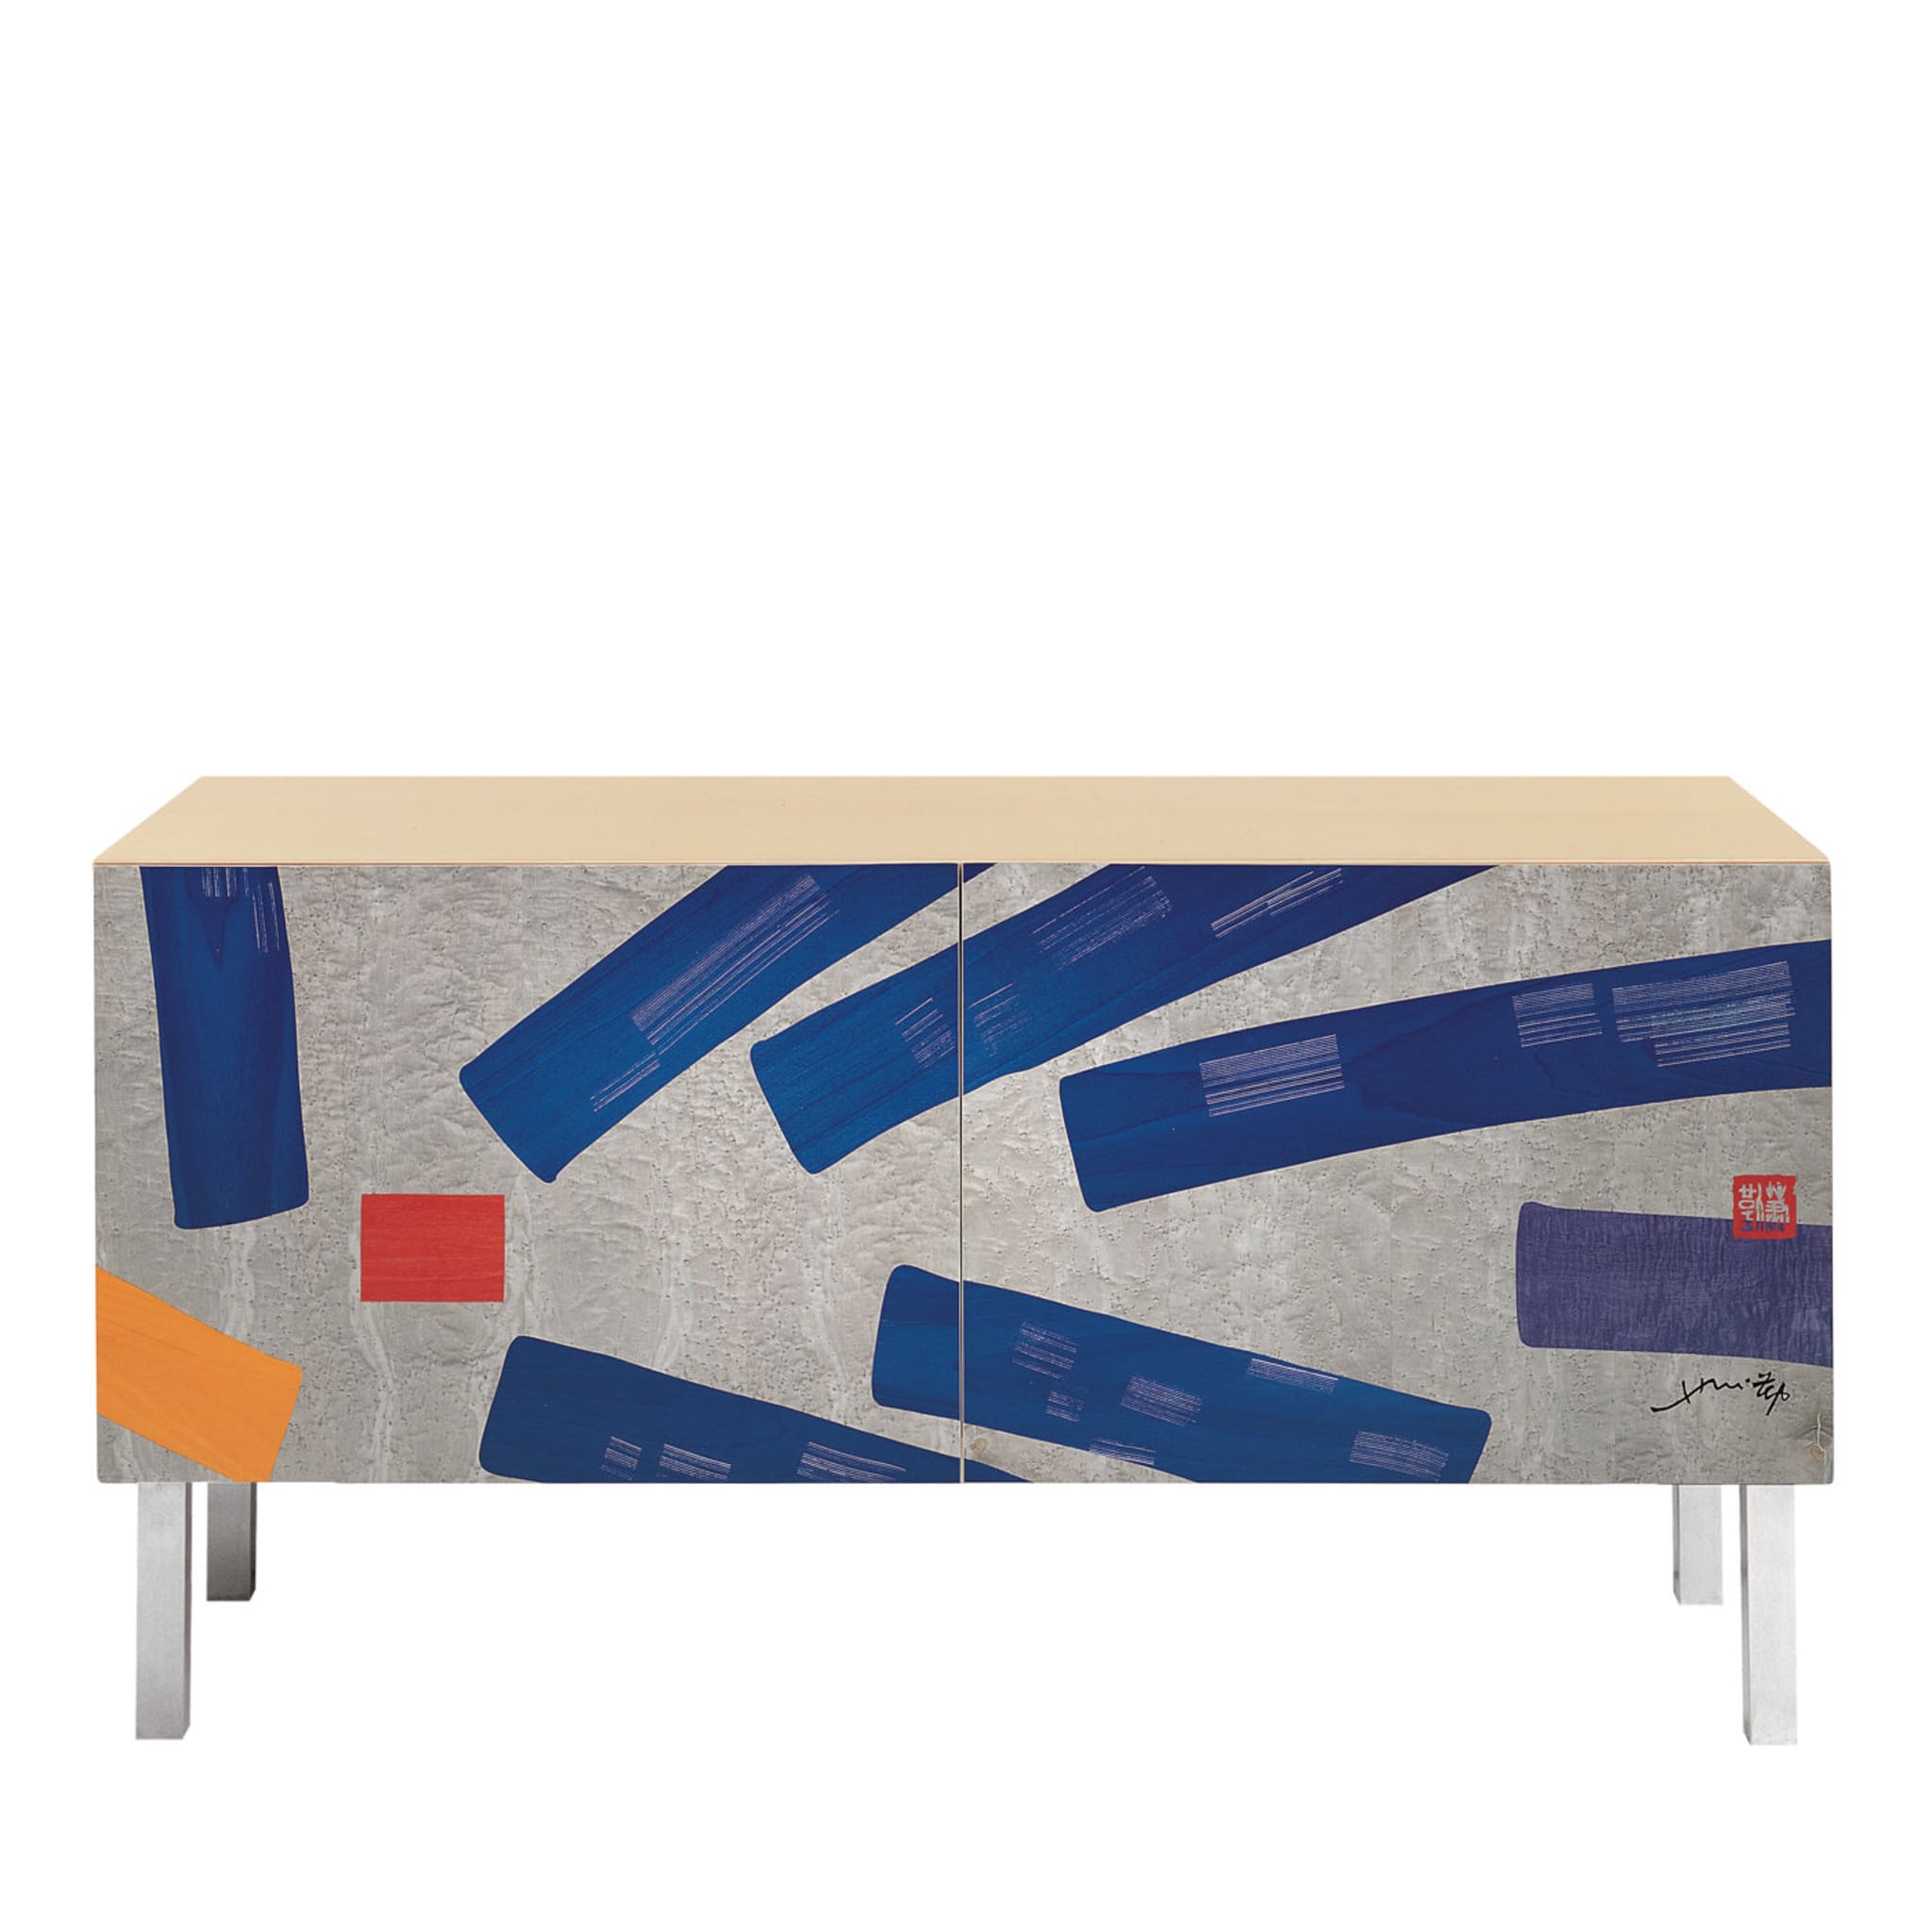 Intarsia Sideboard by Hsiao Chin - Main view